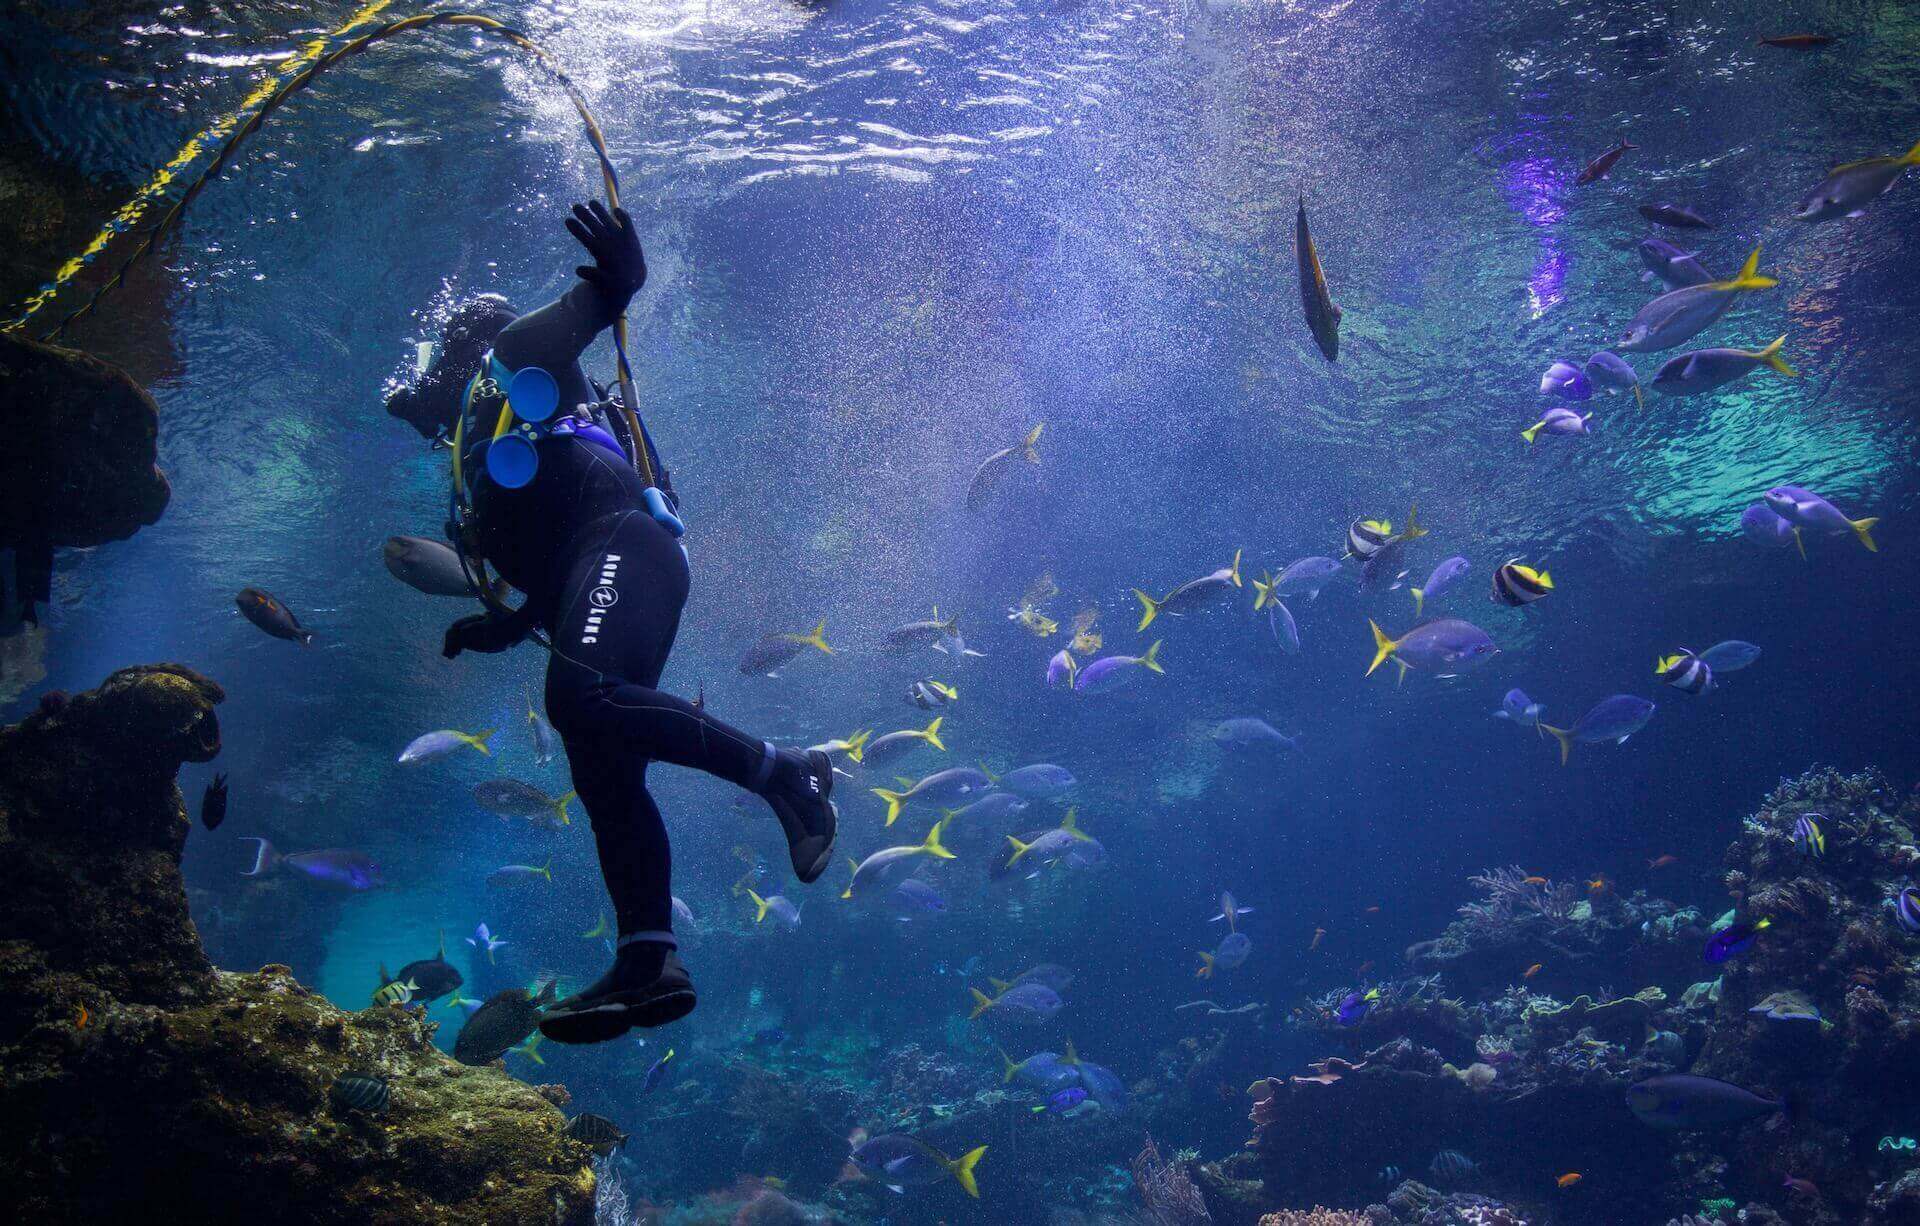 A man scuba diving in the ocean surrounded by fish